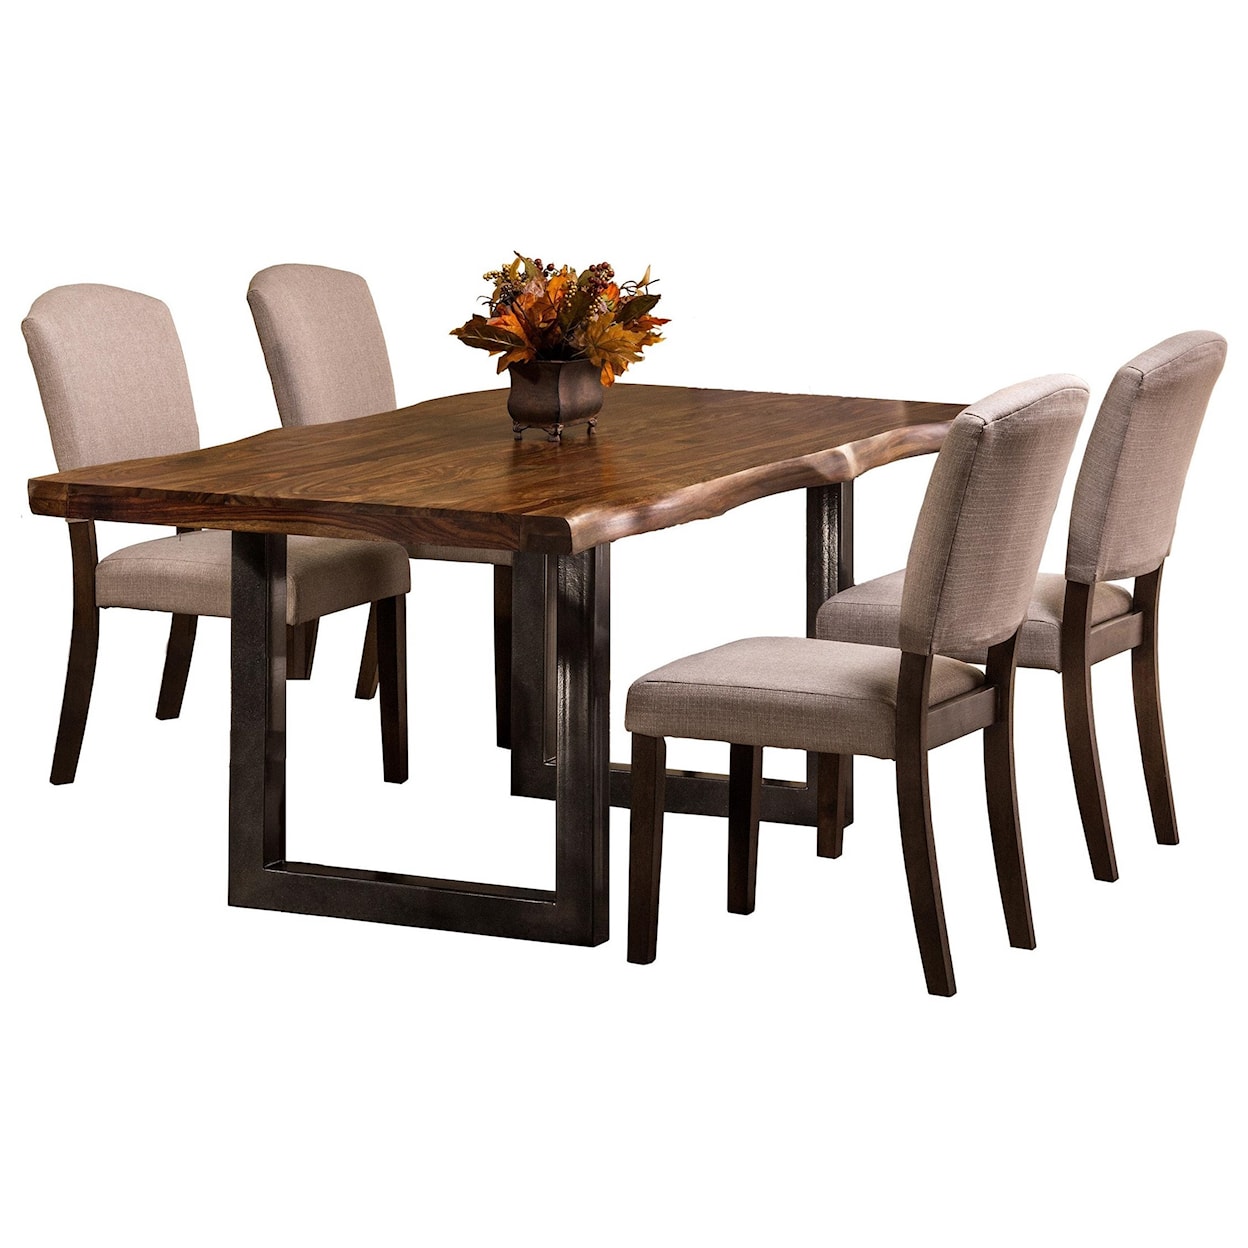 Hillsdale Emerson 5-Piece Rectangle Dining Set